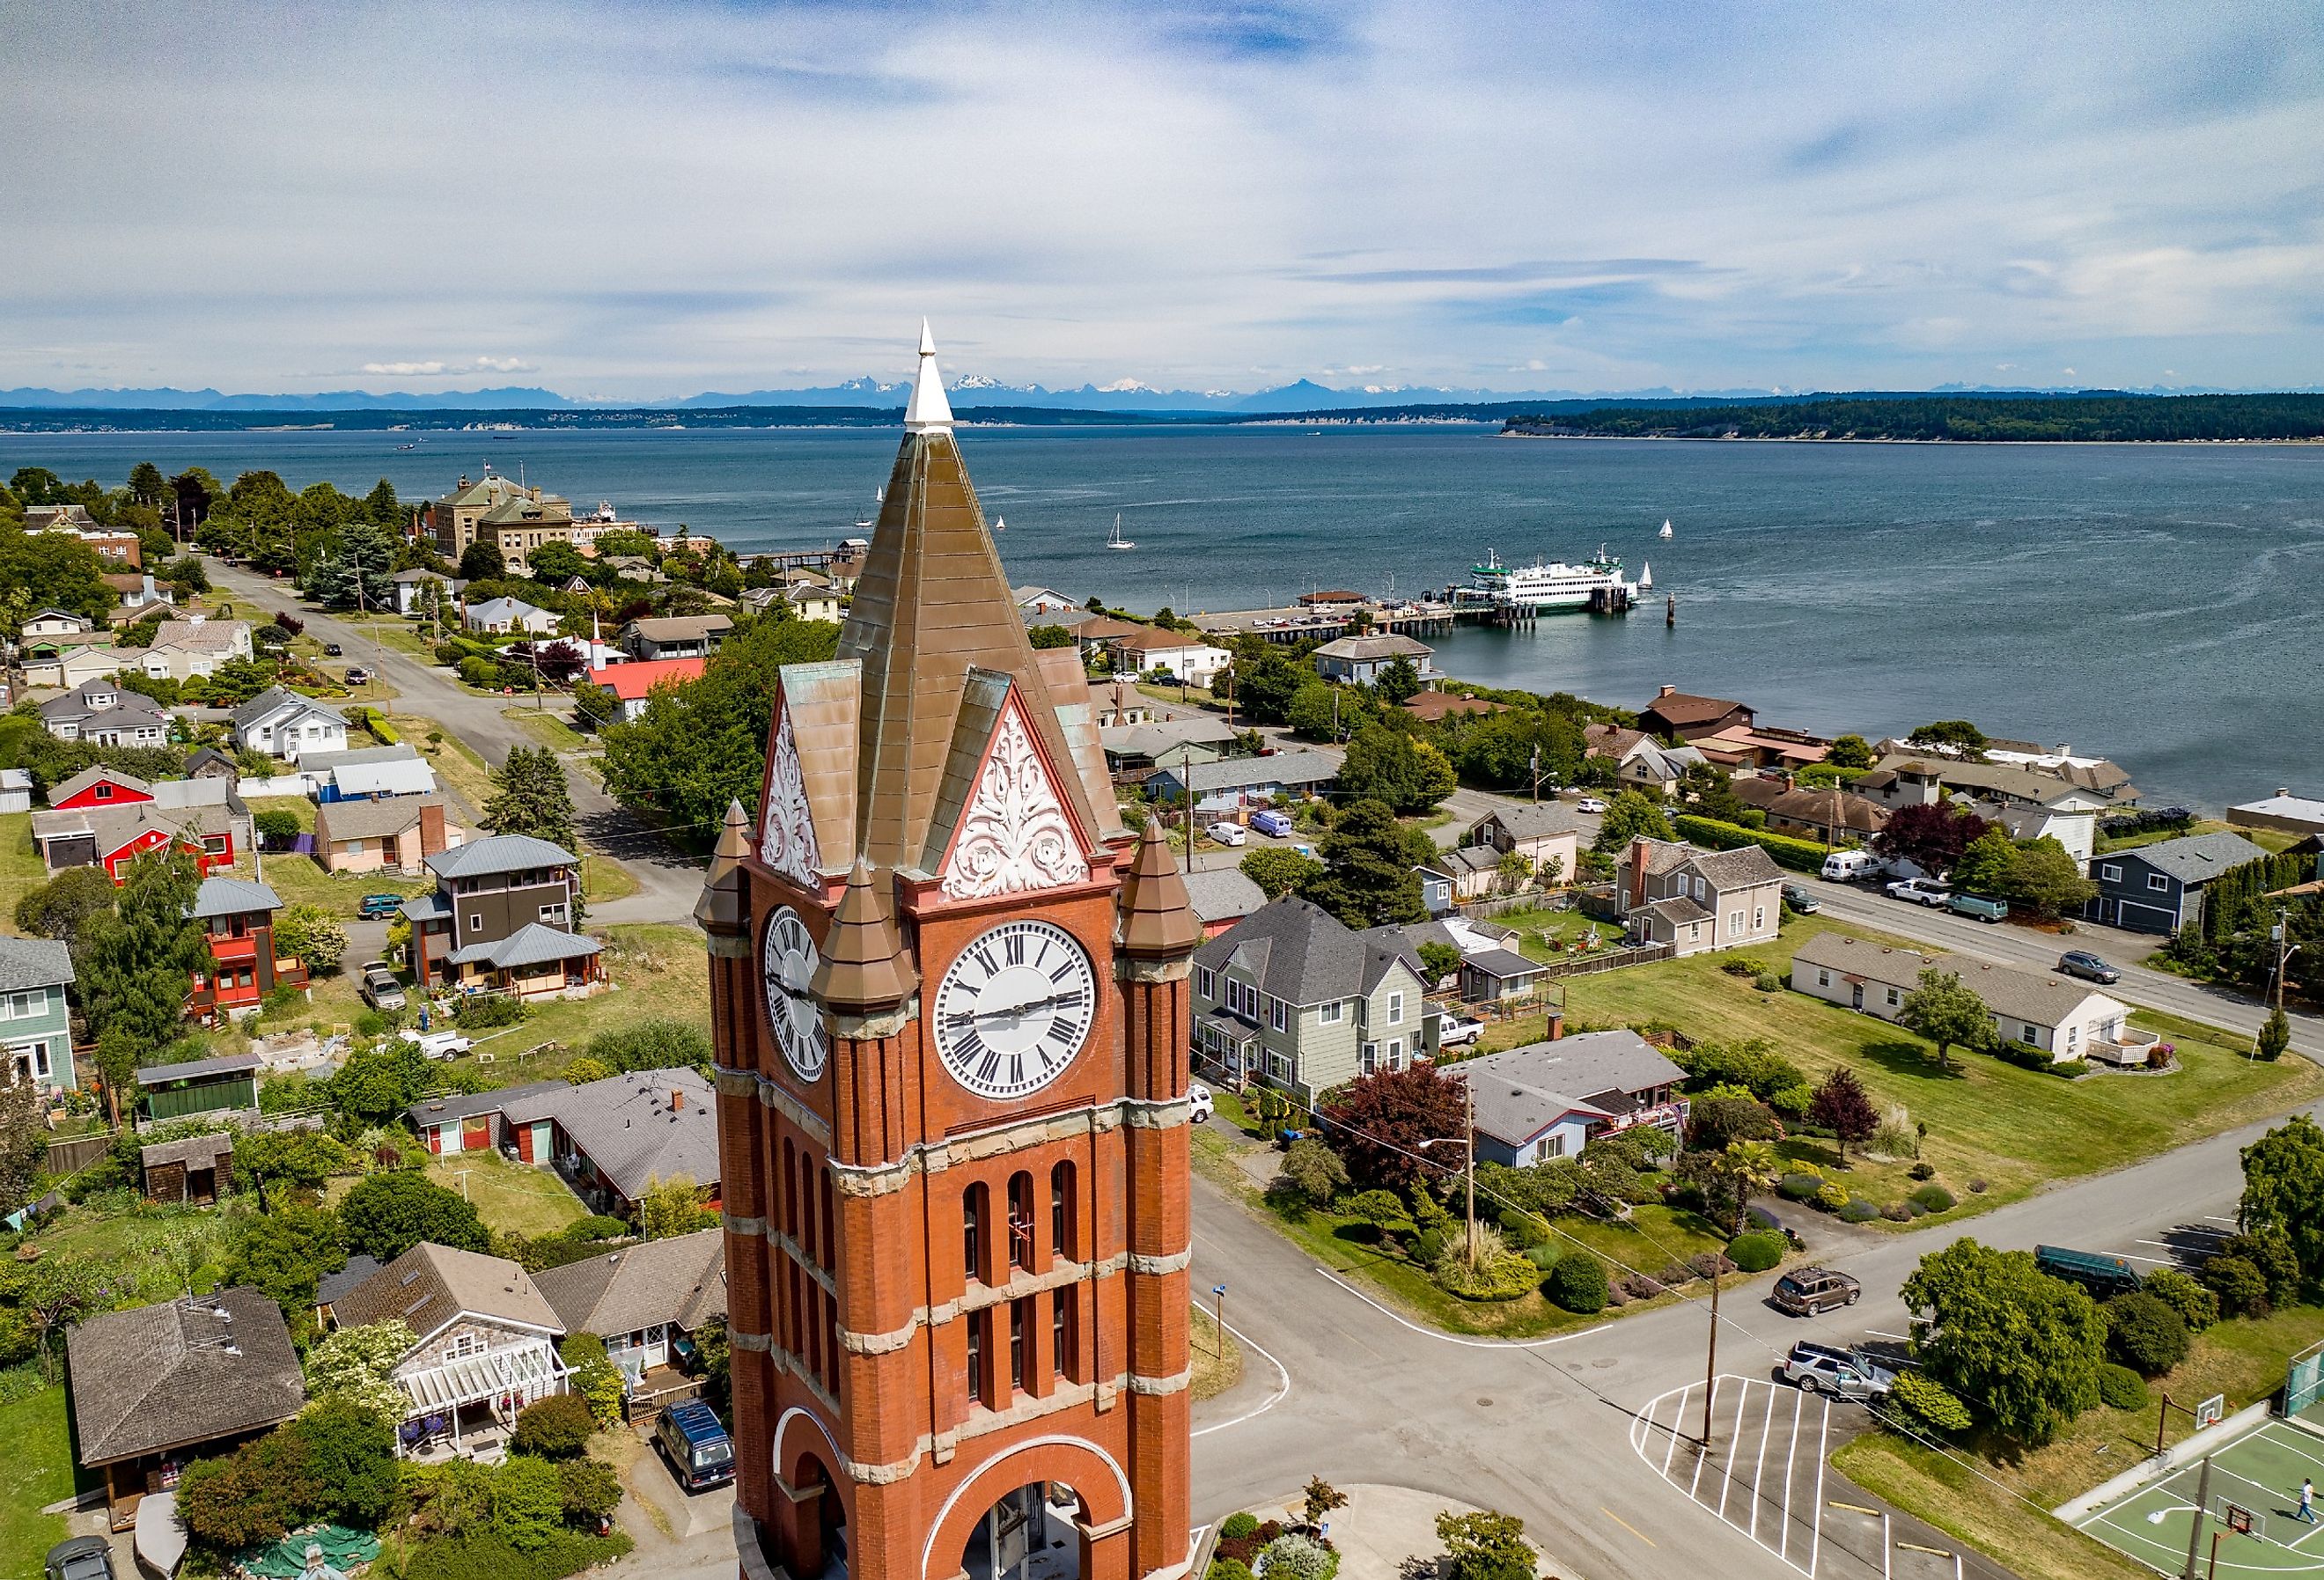 Overlooking Port Townsend and the harbor in Washington.